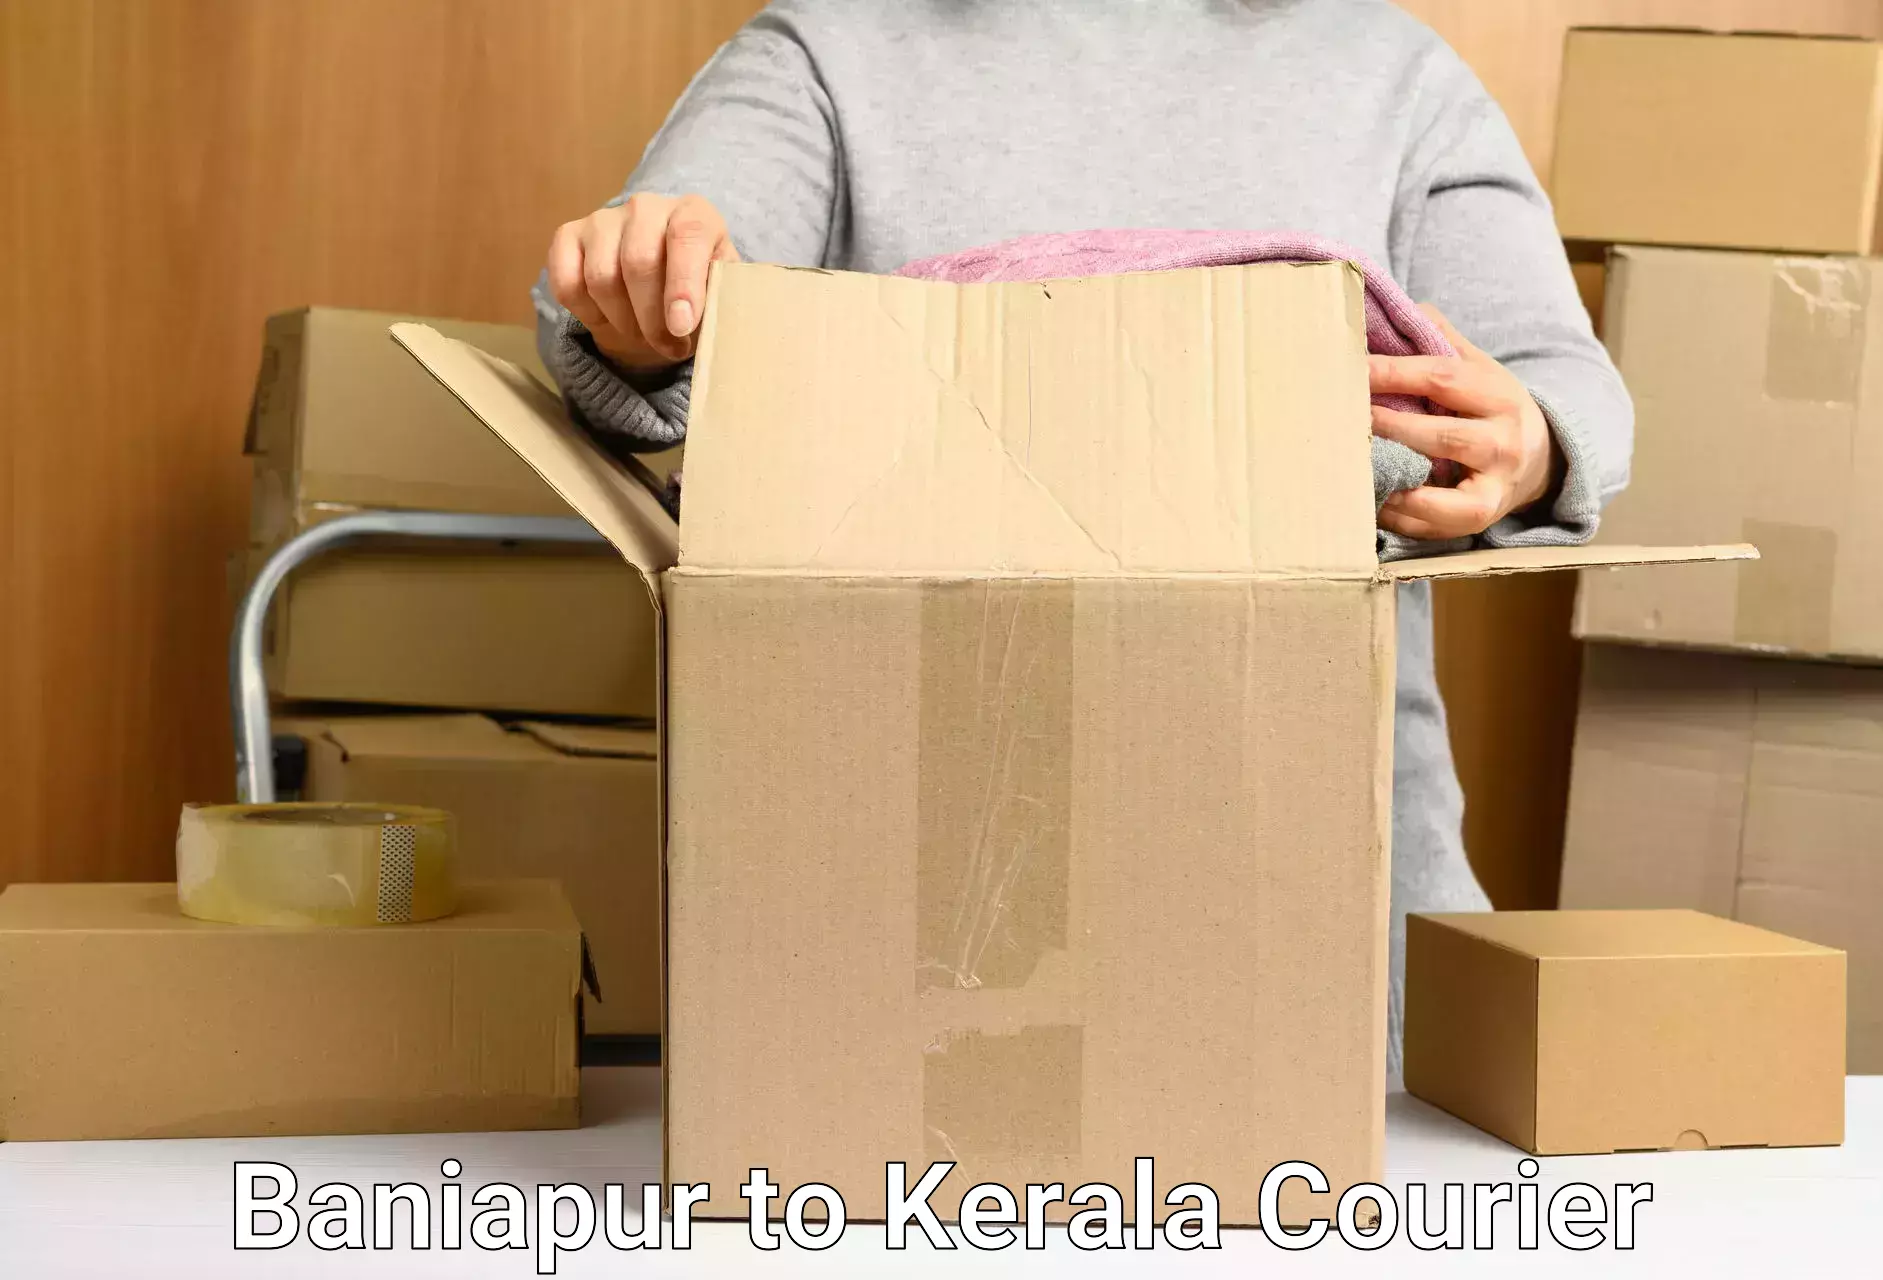 Customer-friendly courier services Baniapur to Thamarassery